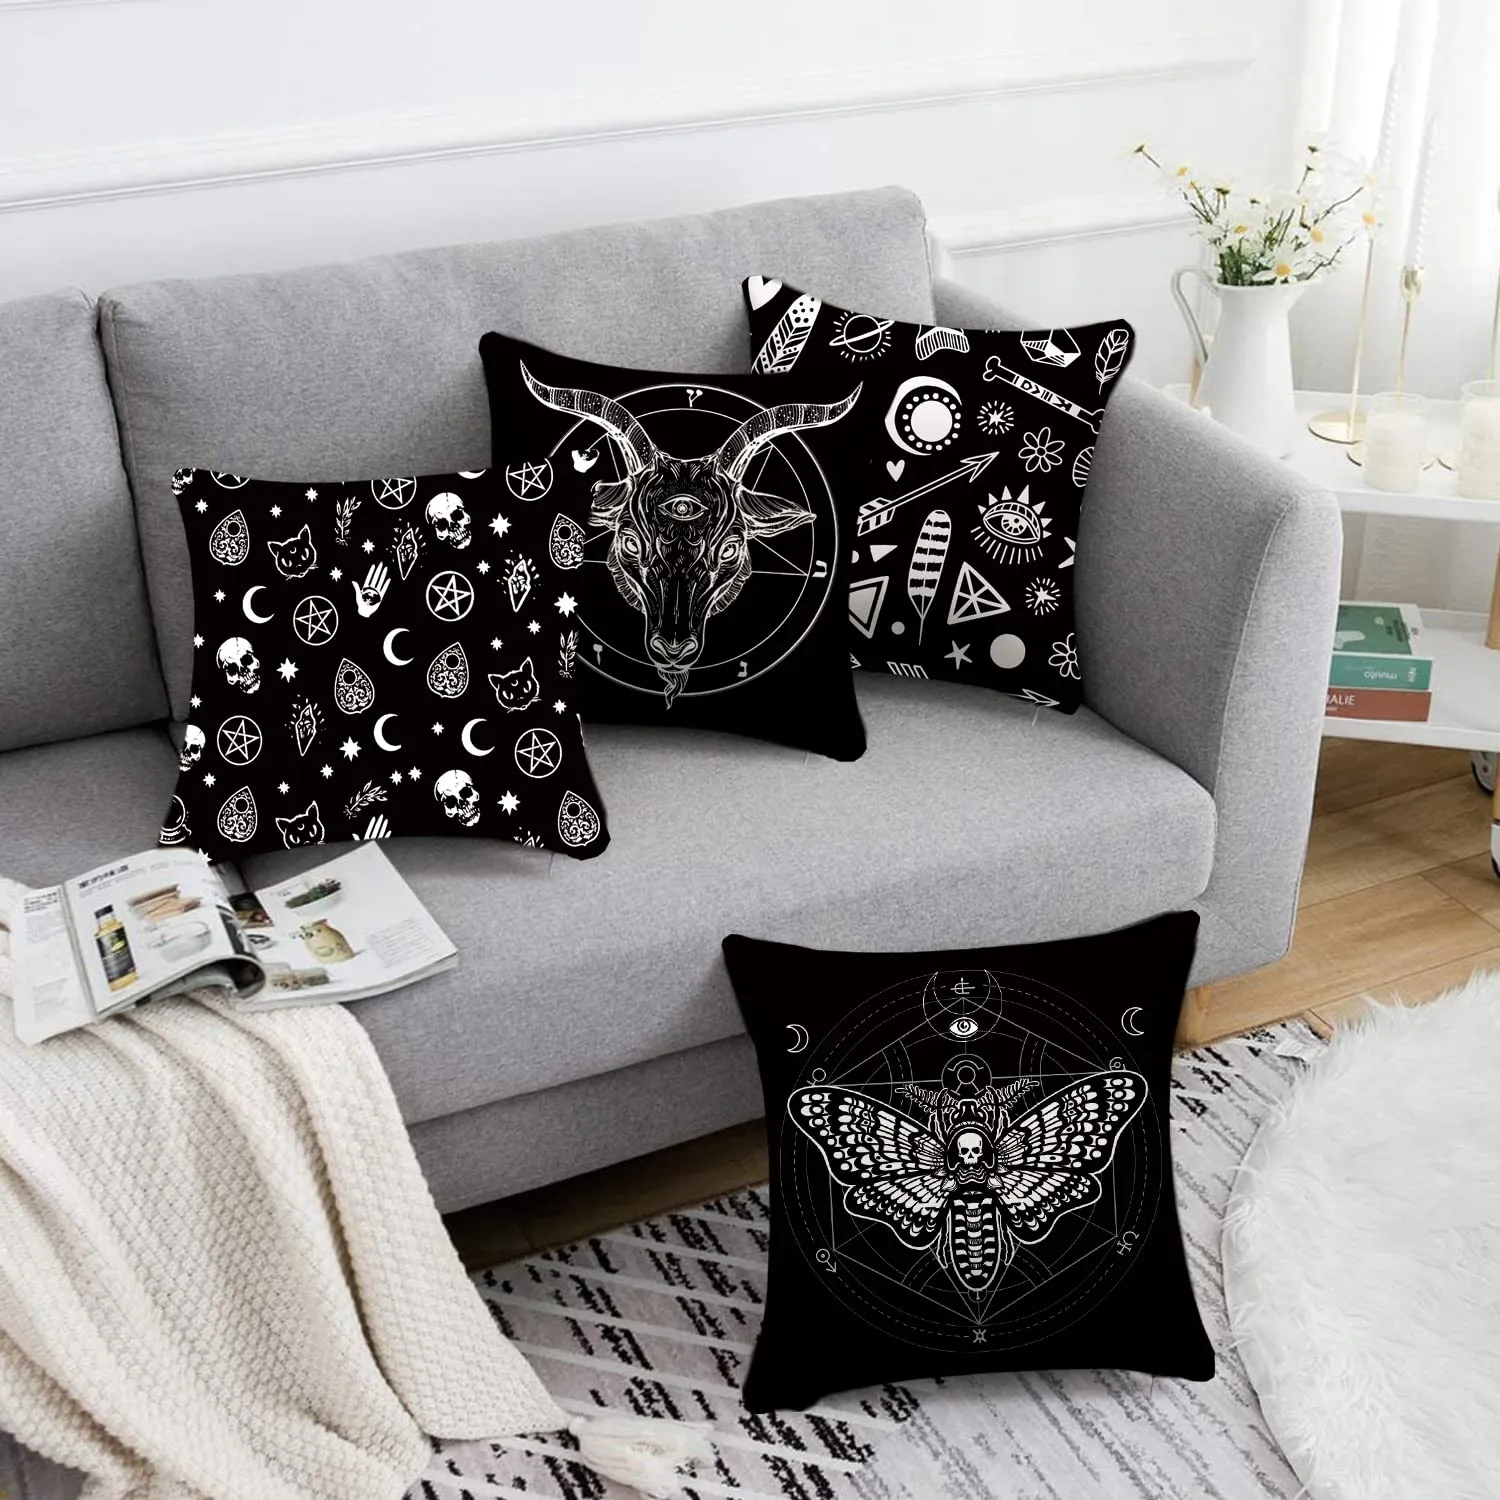 Pillow Case Decorative Ers Throw Ers18X18 Gothic Pillows For Couch Black Accent  Pillows Set Of 4 Cushion Er Sofa Living Room Sport1 Amgwe From 1,77 €